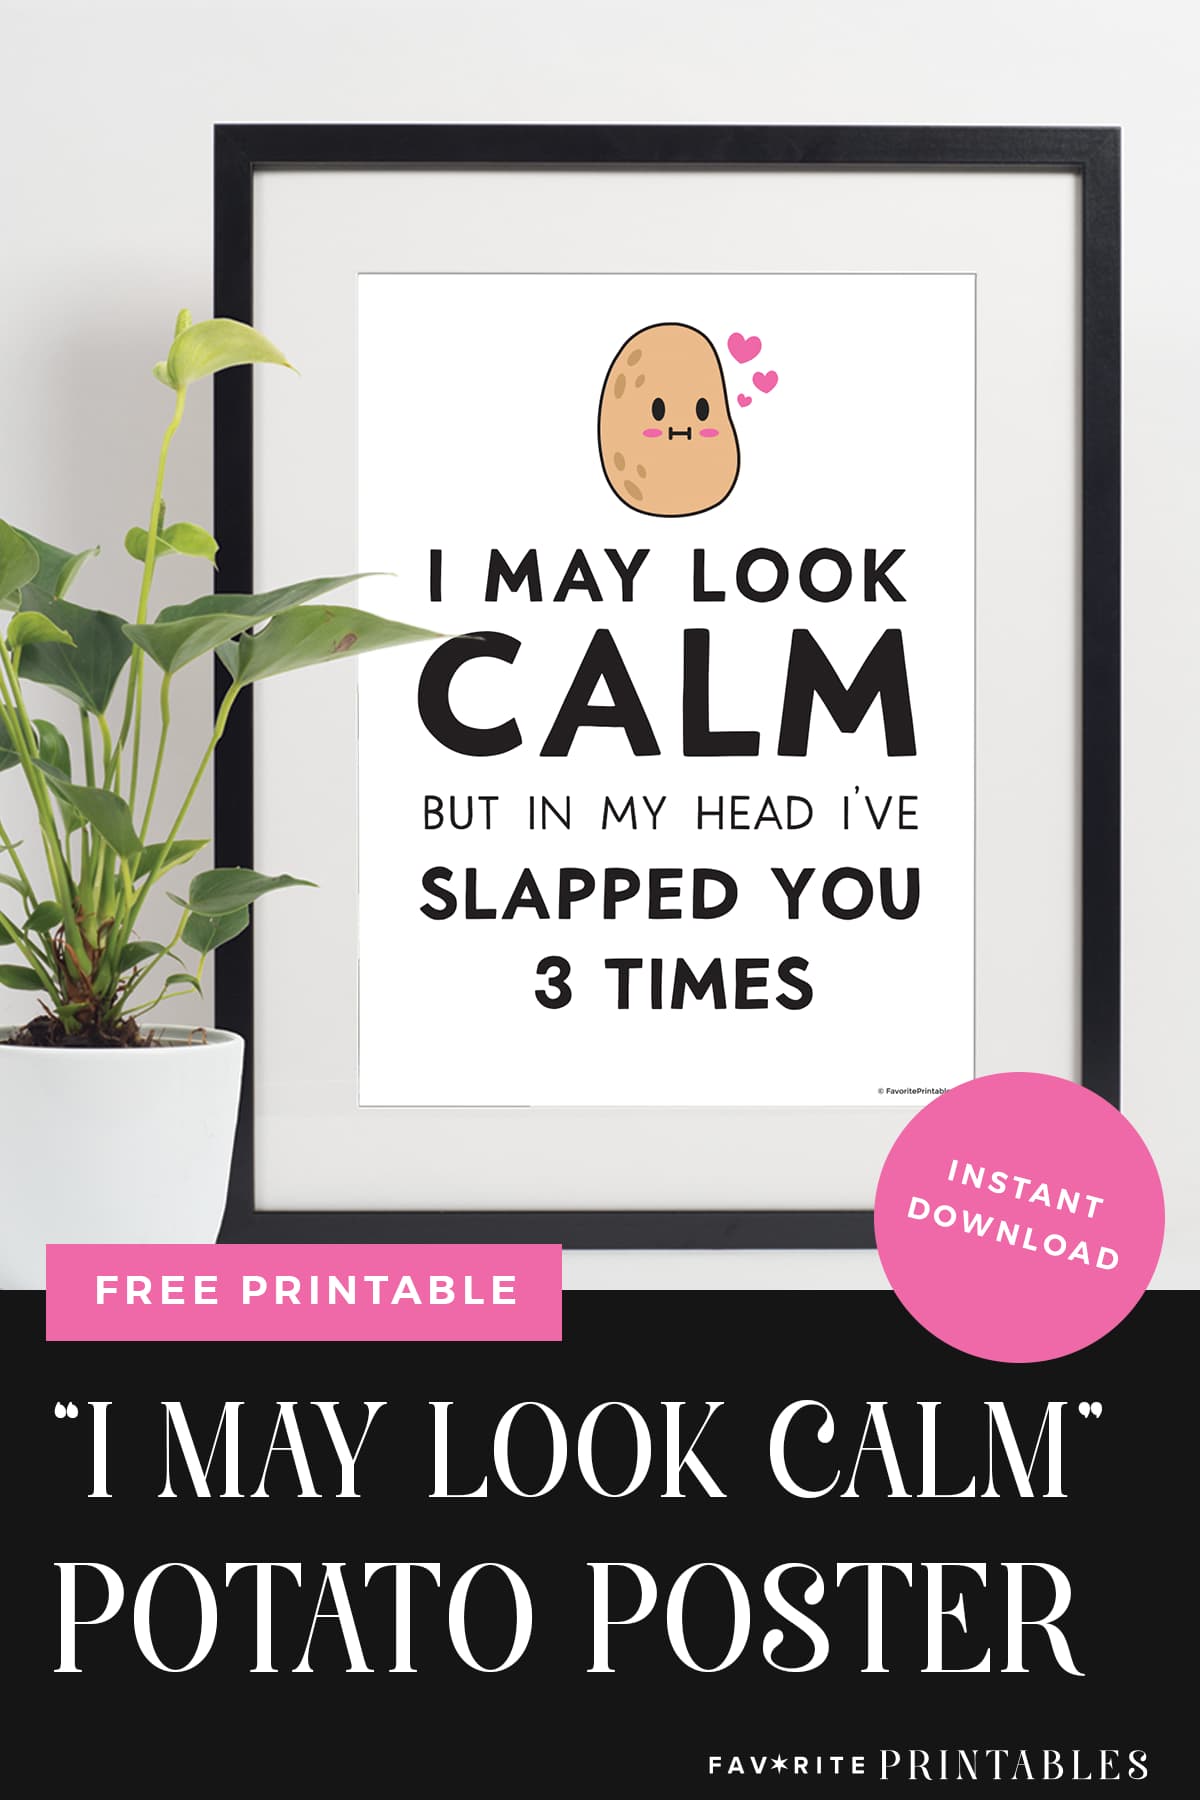 I may look calm but in my head i've slapped you three times potato poster pin.